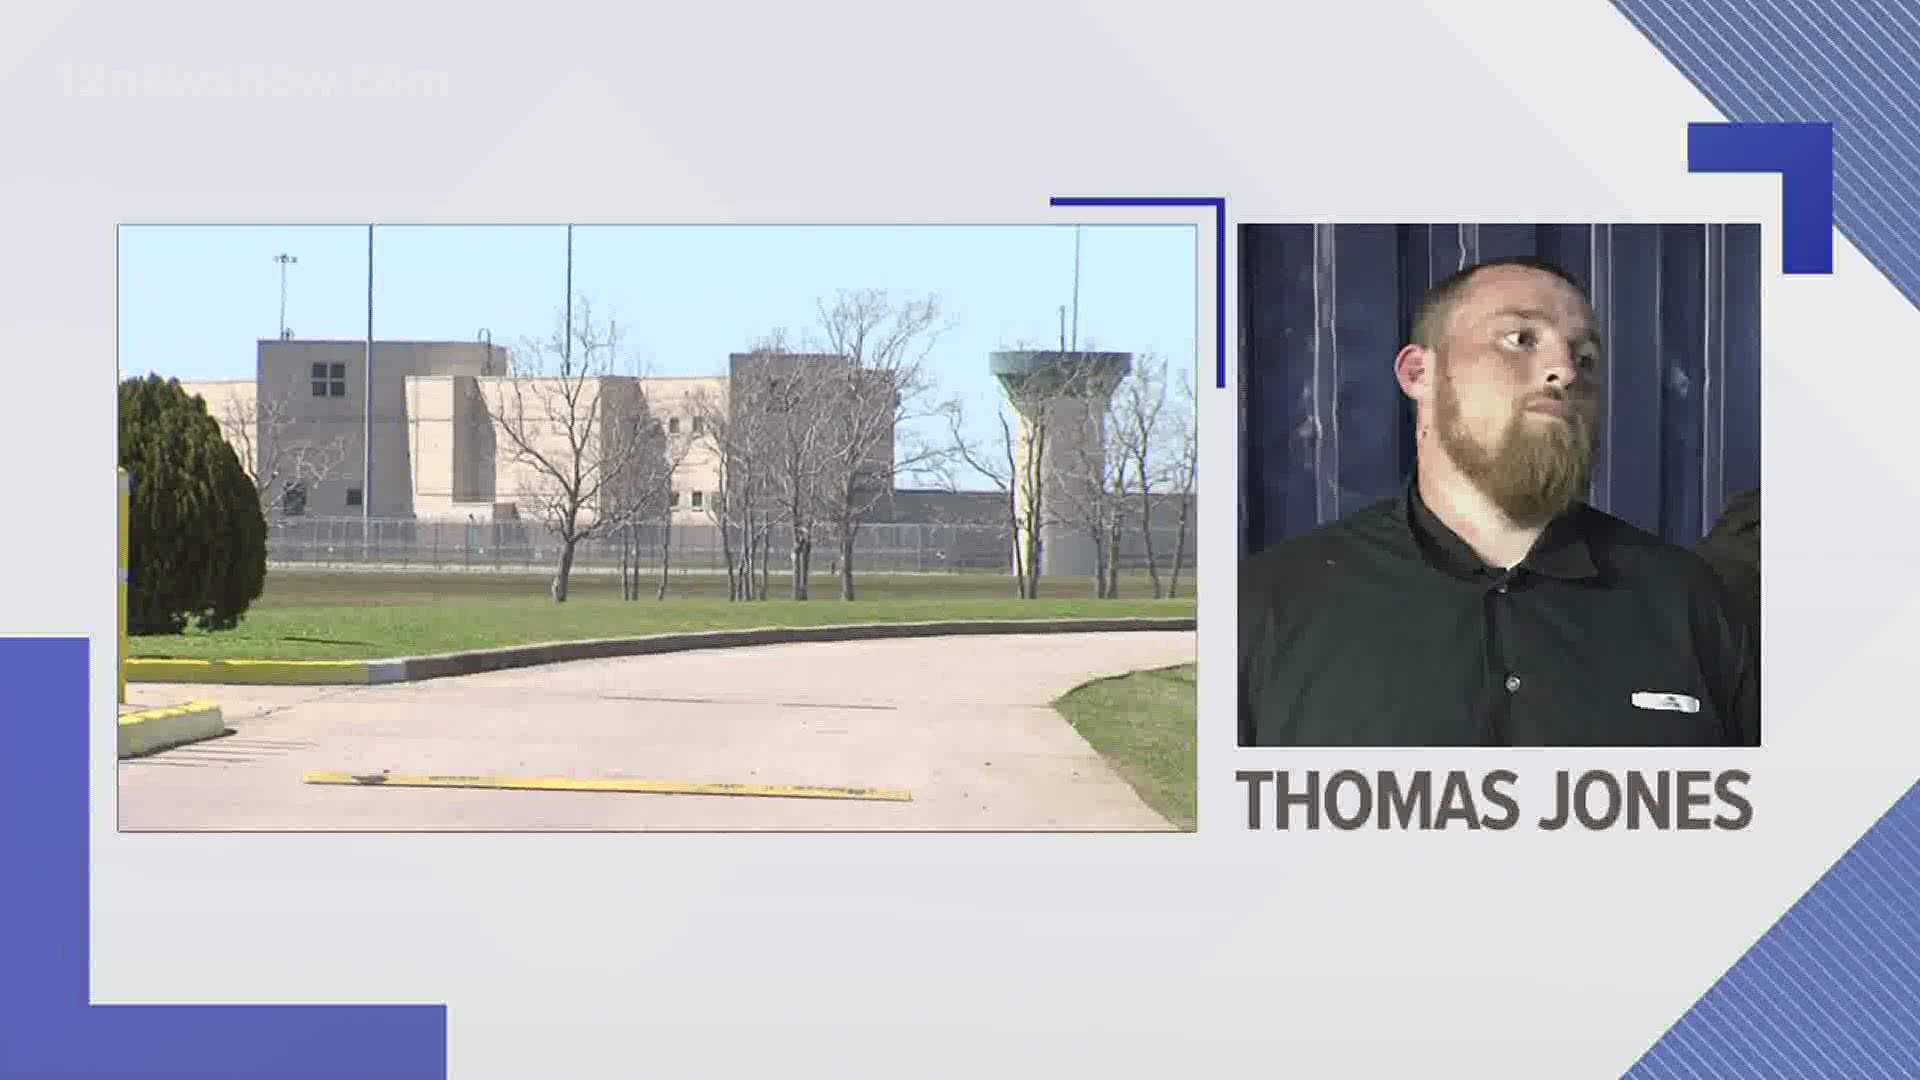 Officials said 28-year-old Thomas Jones escaped the satellite prison camp Wednesday night. He is serving a 6 year sentence for a drug charge in West Texas.